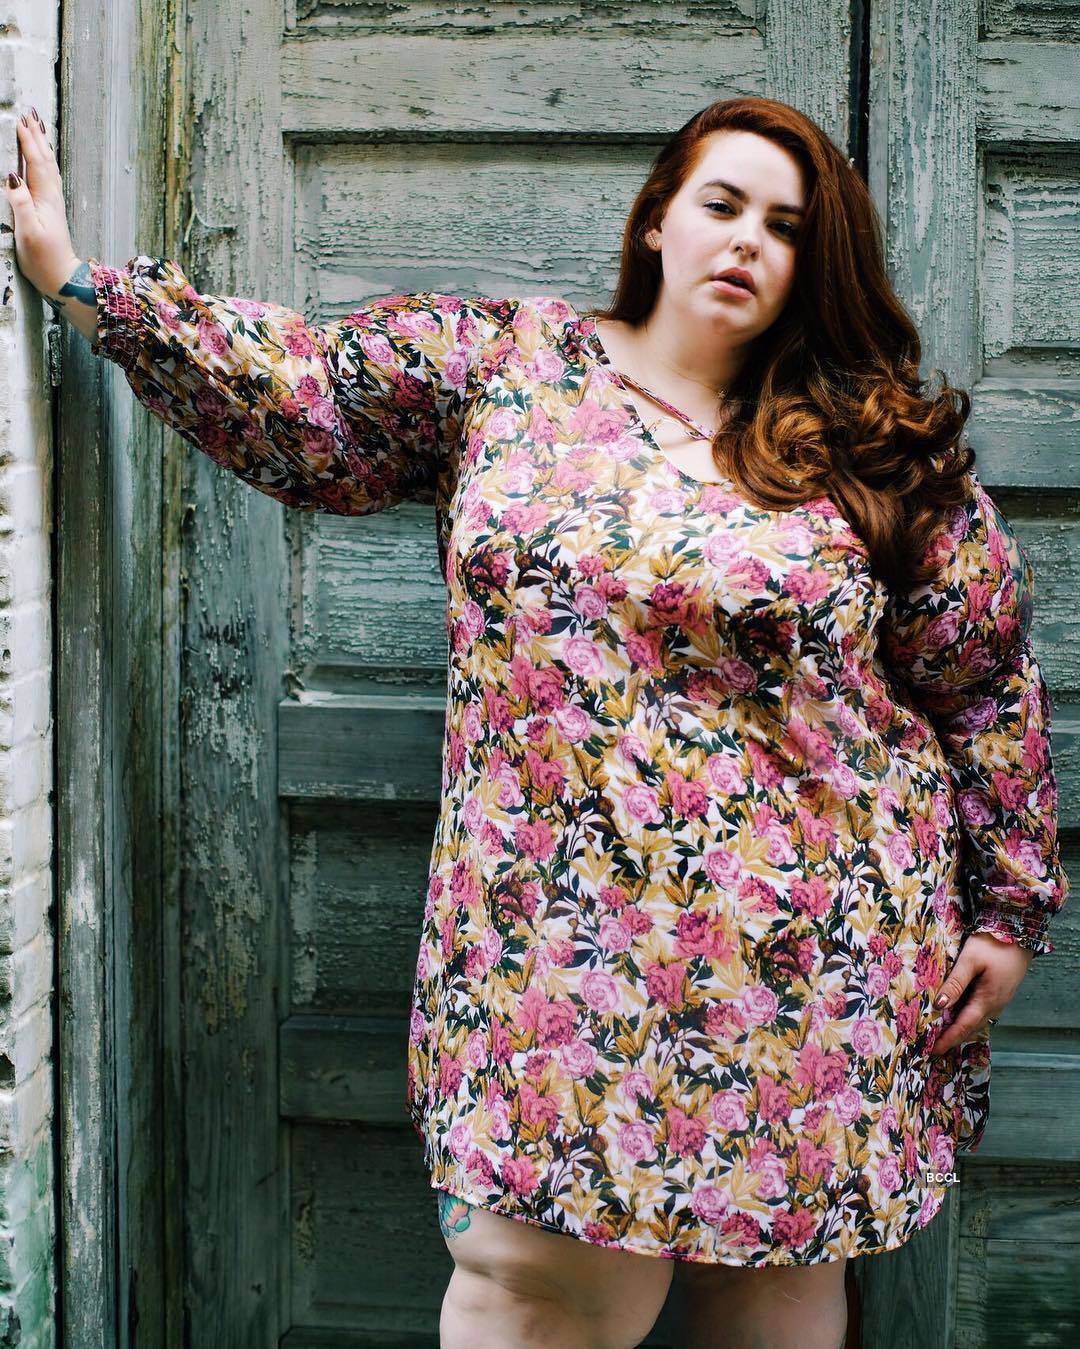 Author of 'Fat Girl' Tess Holliday changes the perception of plus size models